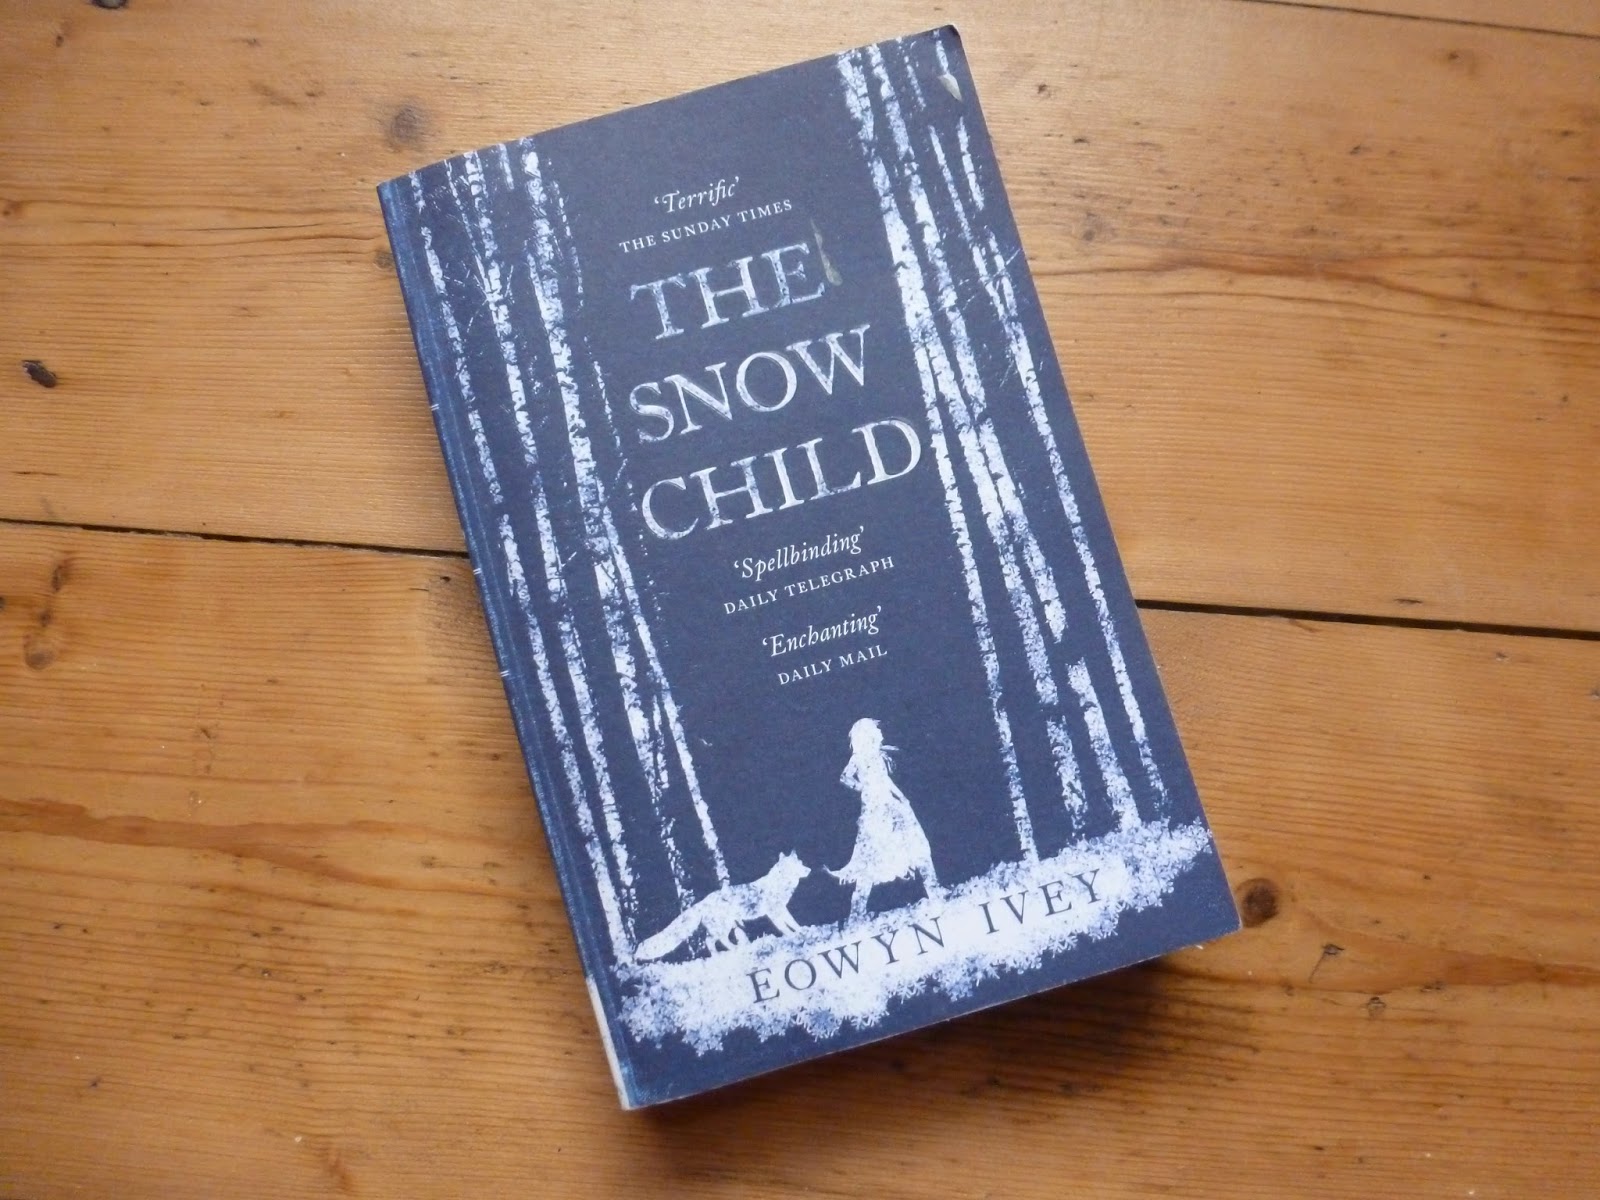 the snow child book by eowyn ivey